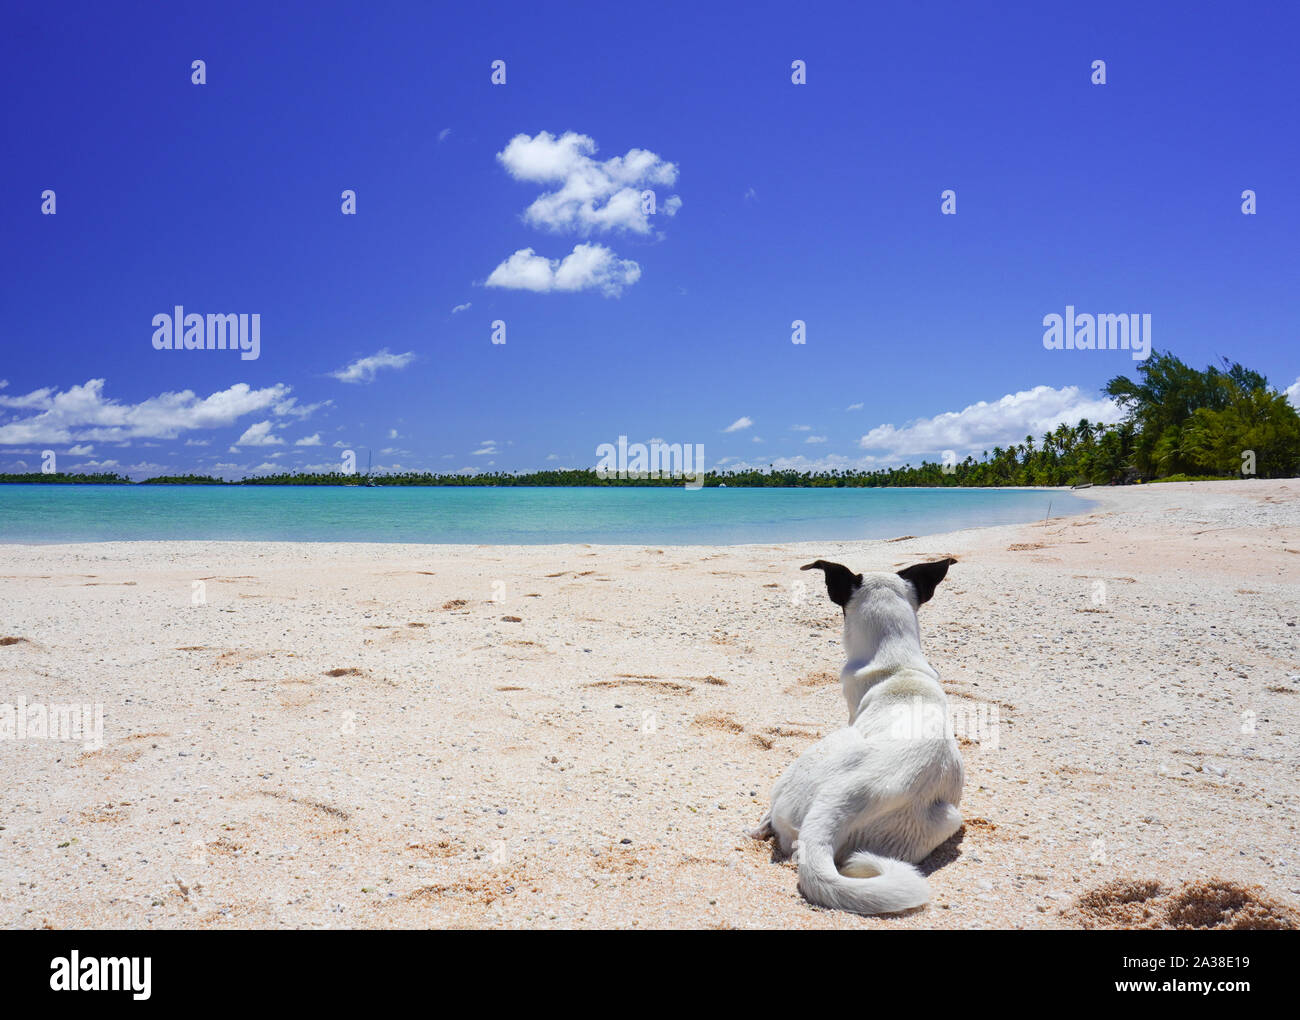 A dog rests on a sandy beach near a tropical lagoon surrounded by palm trees on an island Stock Photo